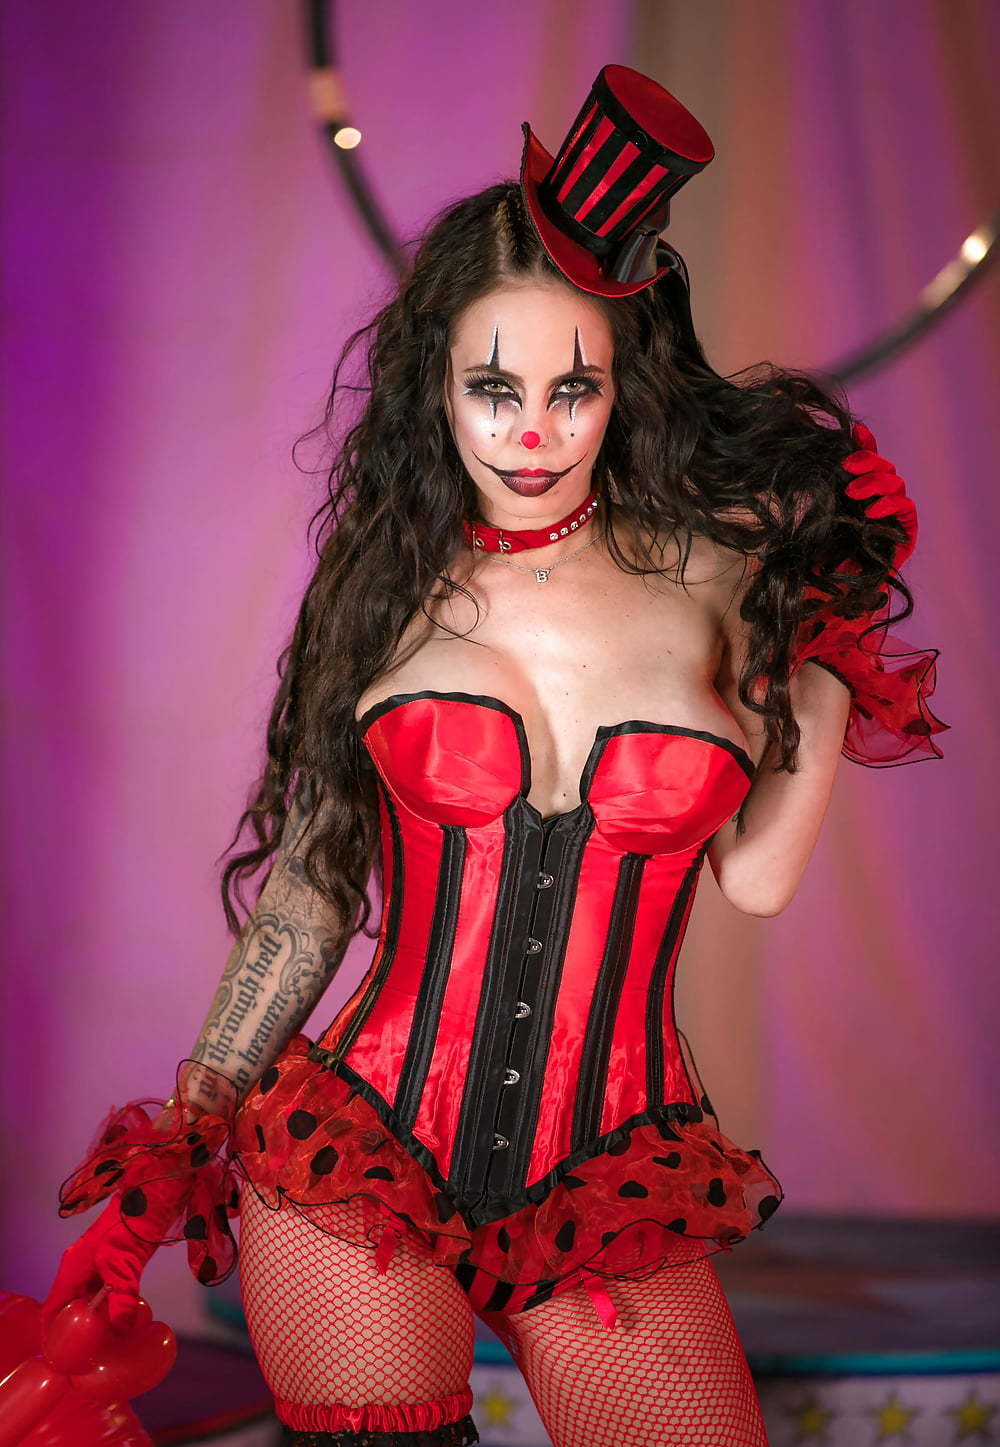 Woman in erotic clown outfit poses